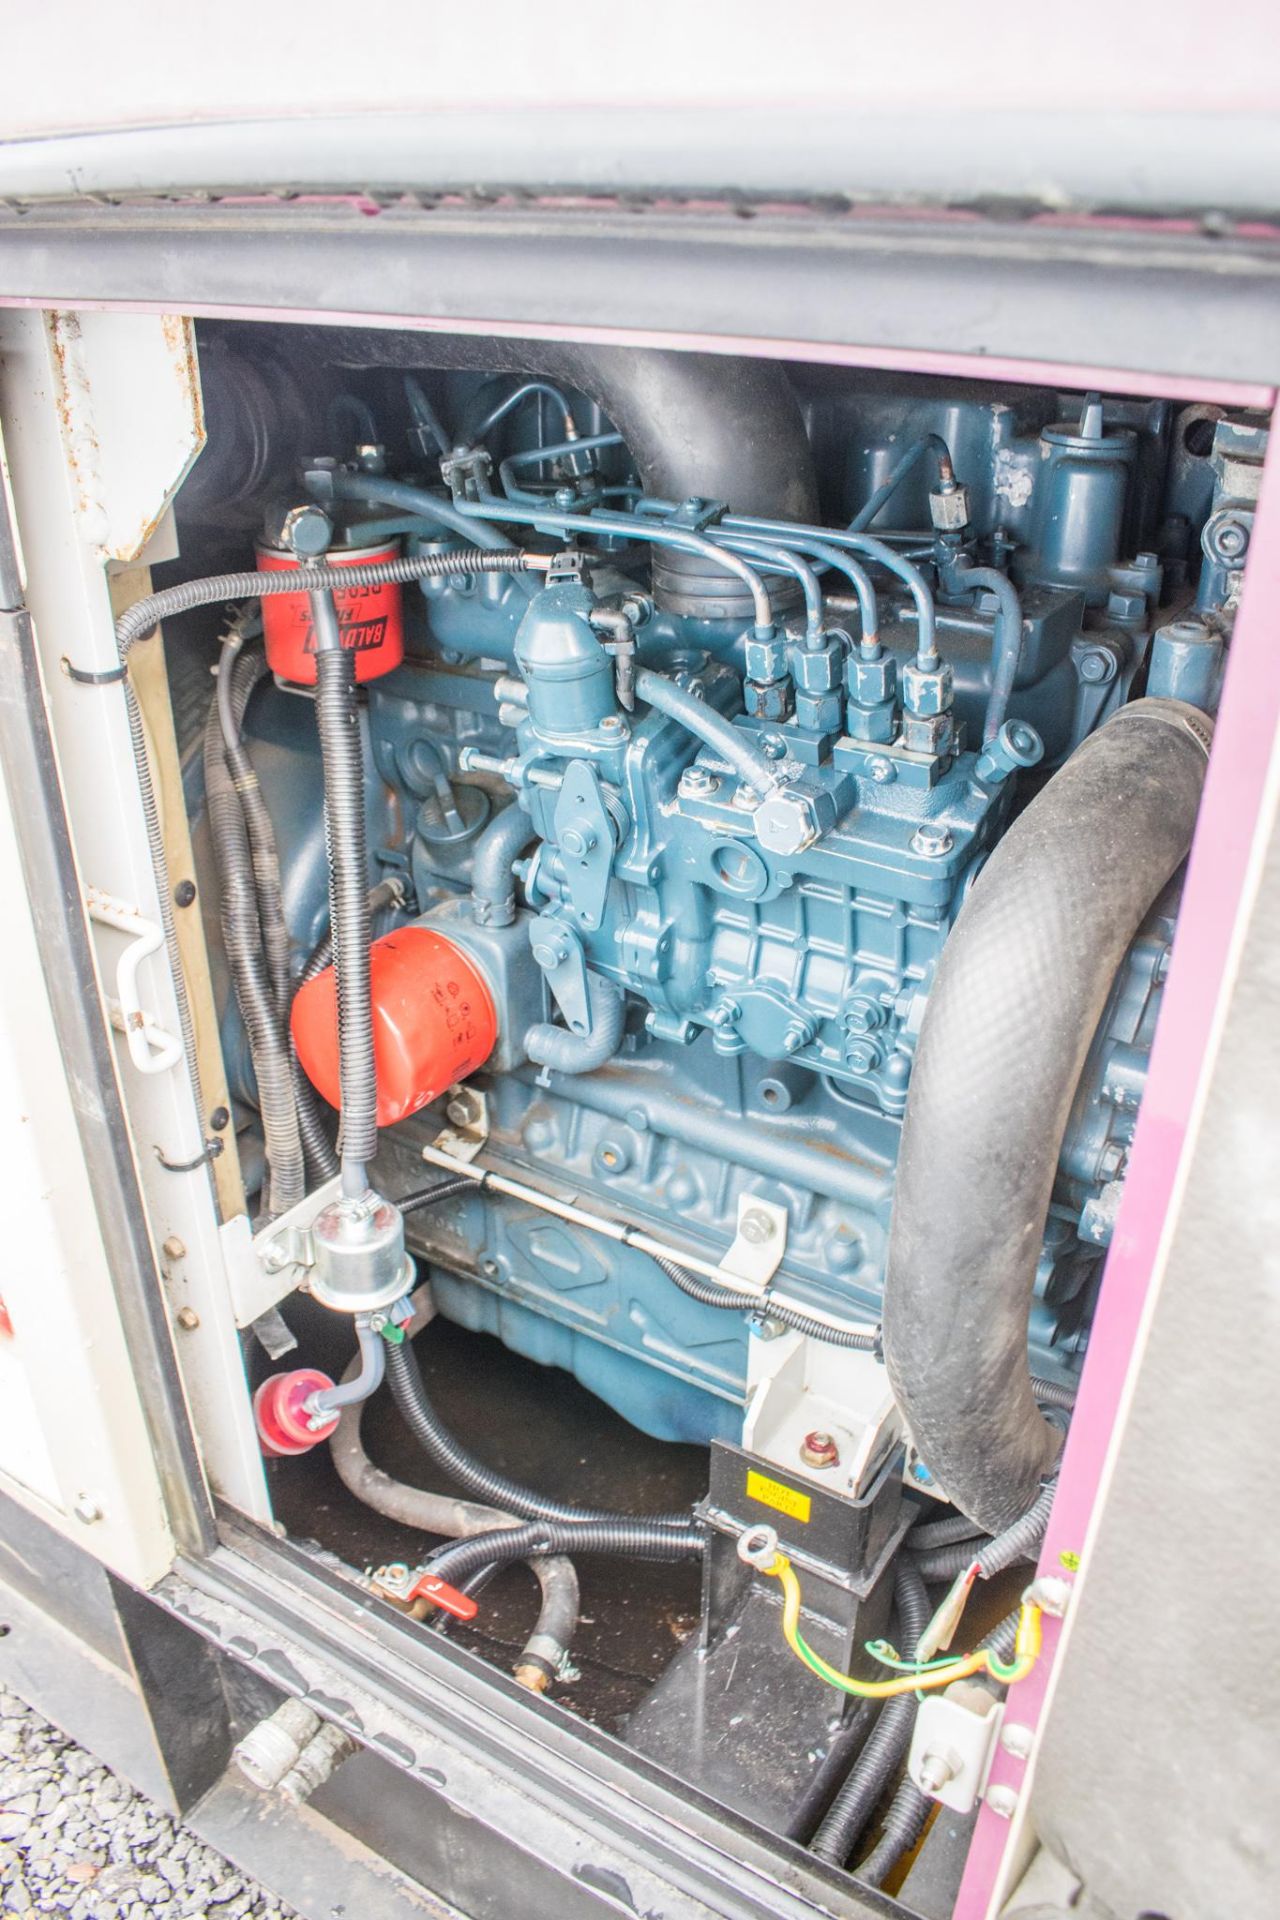 Arc Gen Denyo 30 Kva diesel driven generator  Year: 2011 Recorded Hours:  A576334 - Image 5 of 6